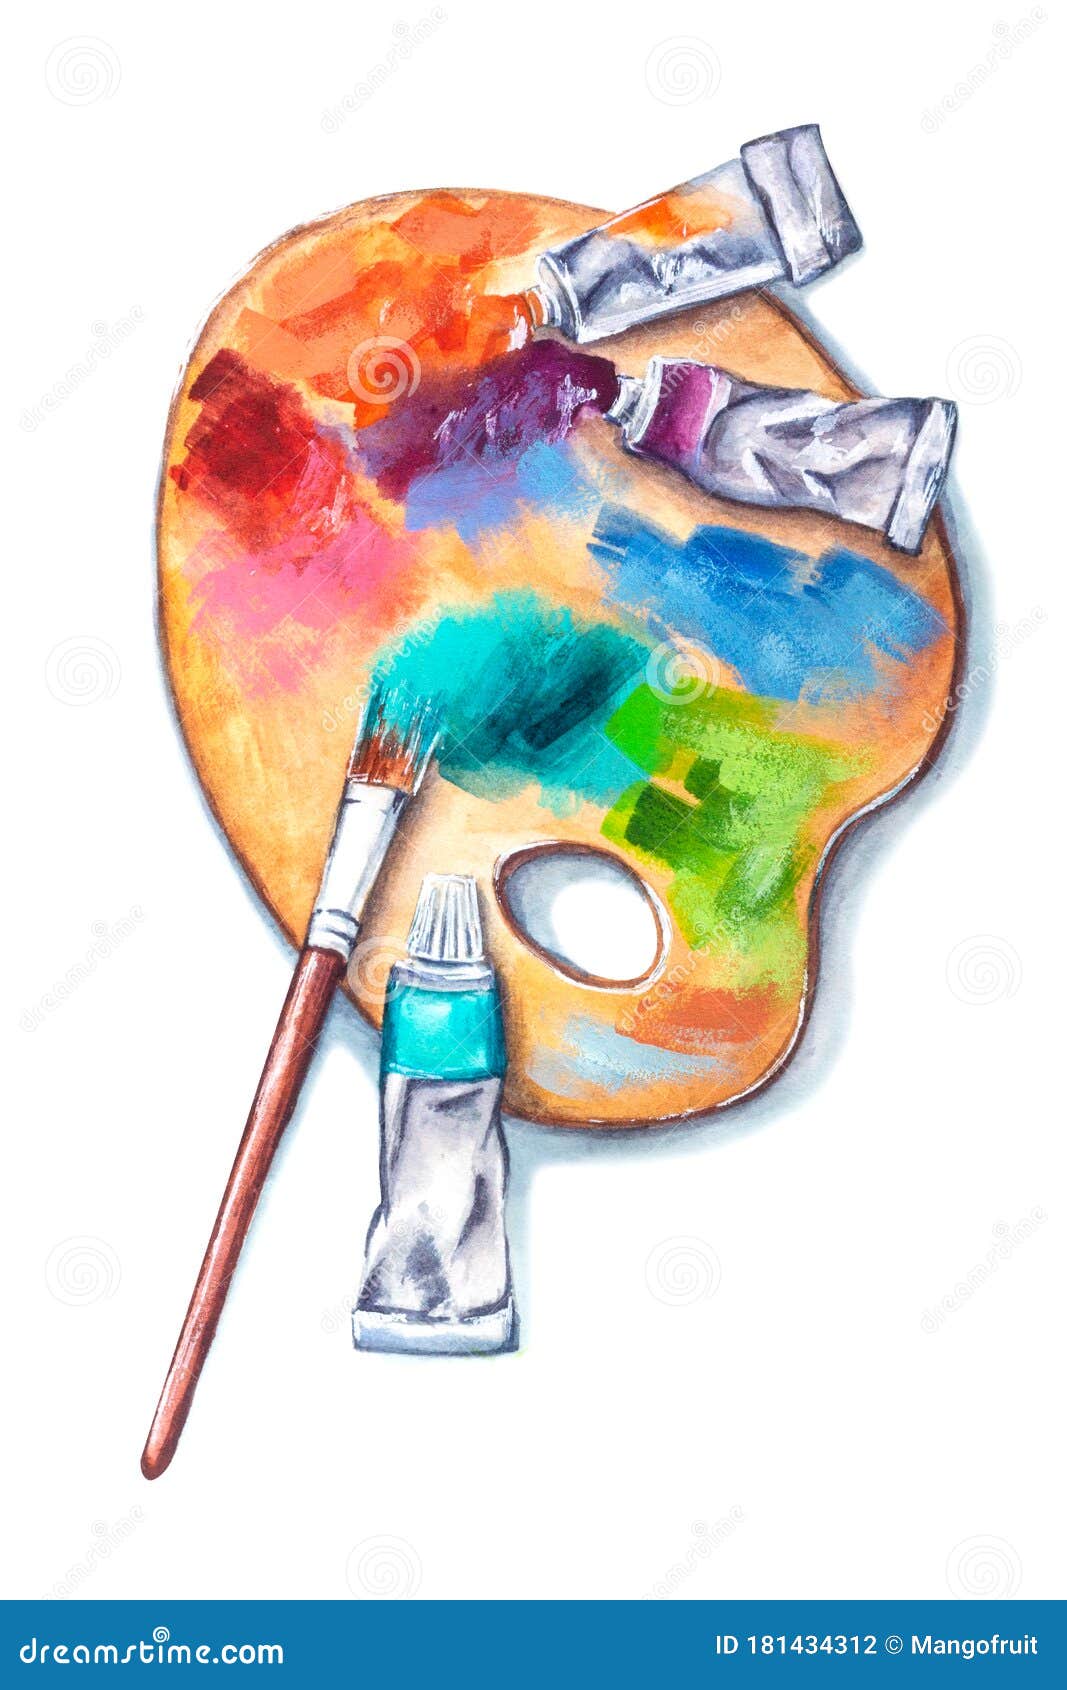 https://thumbs.dreamstime.com/z/watercolor-illustration-art-supplies-wooden-palette-tubes-paints-brush-isolated-white-background-set-realistic-181434312.jpg